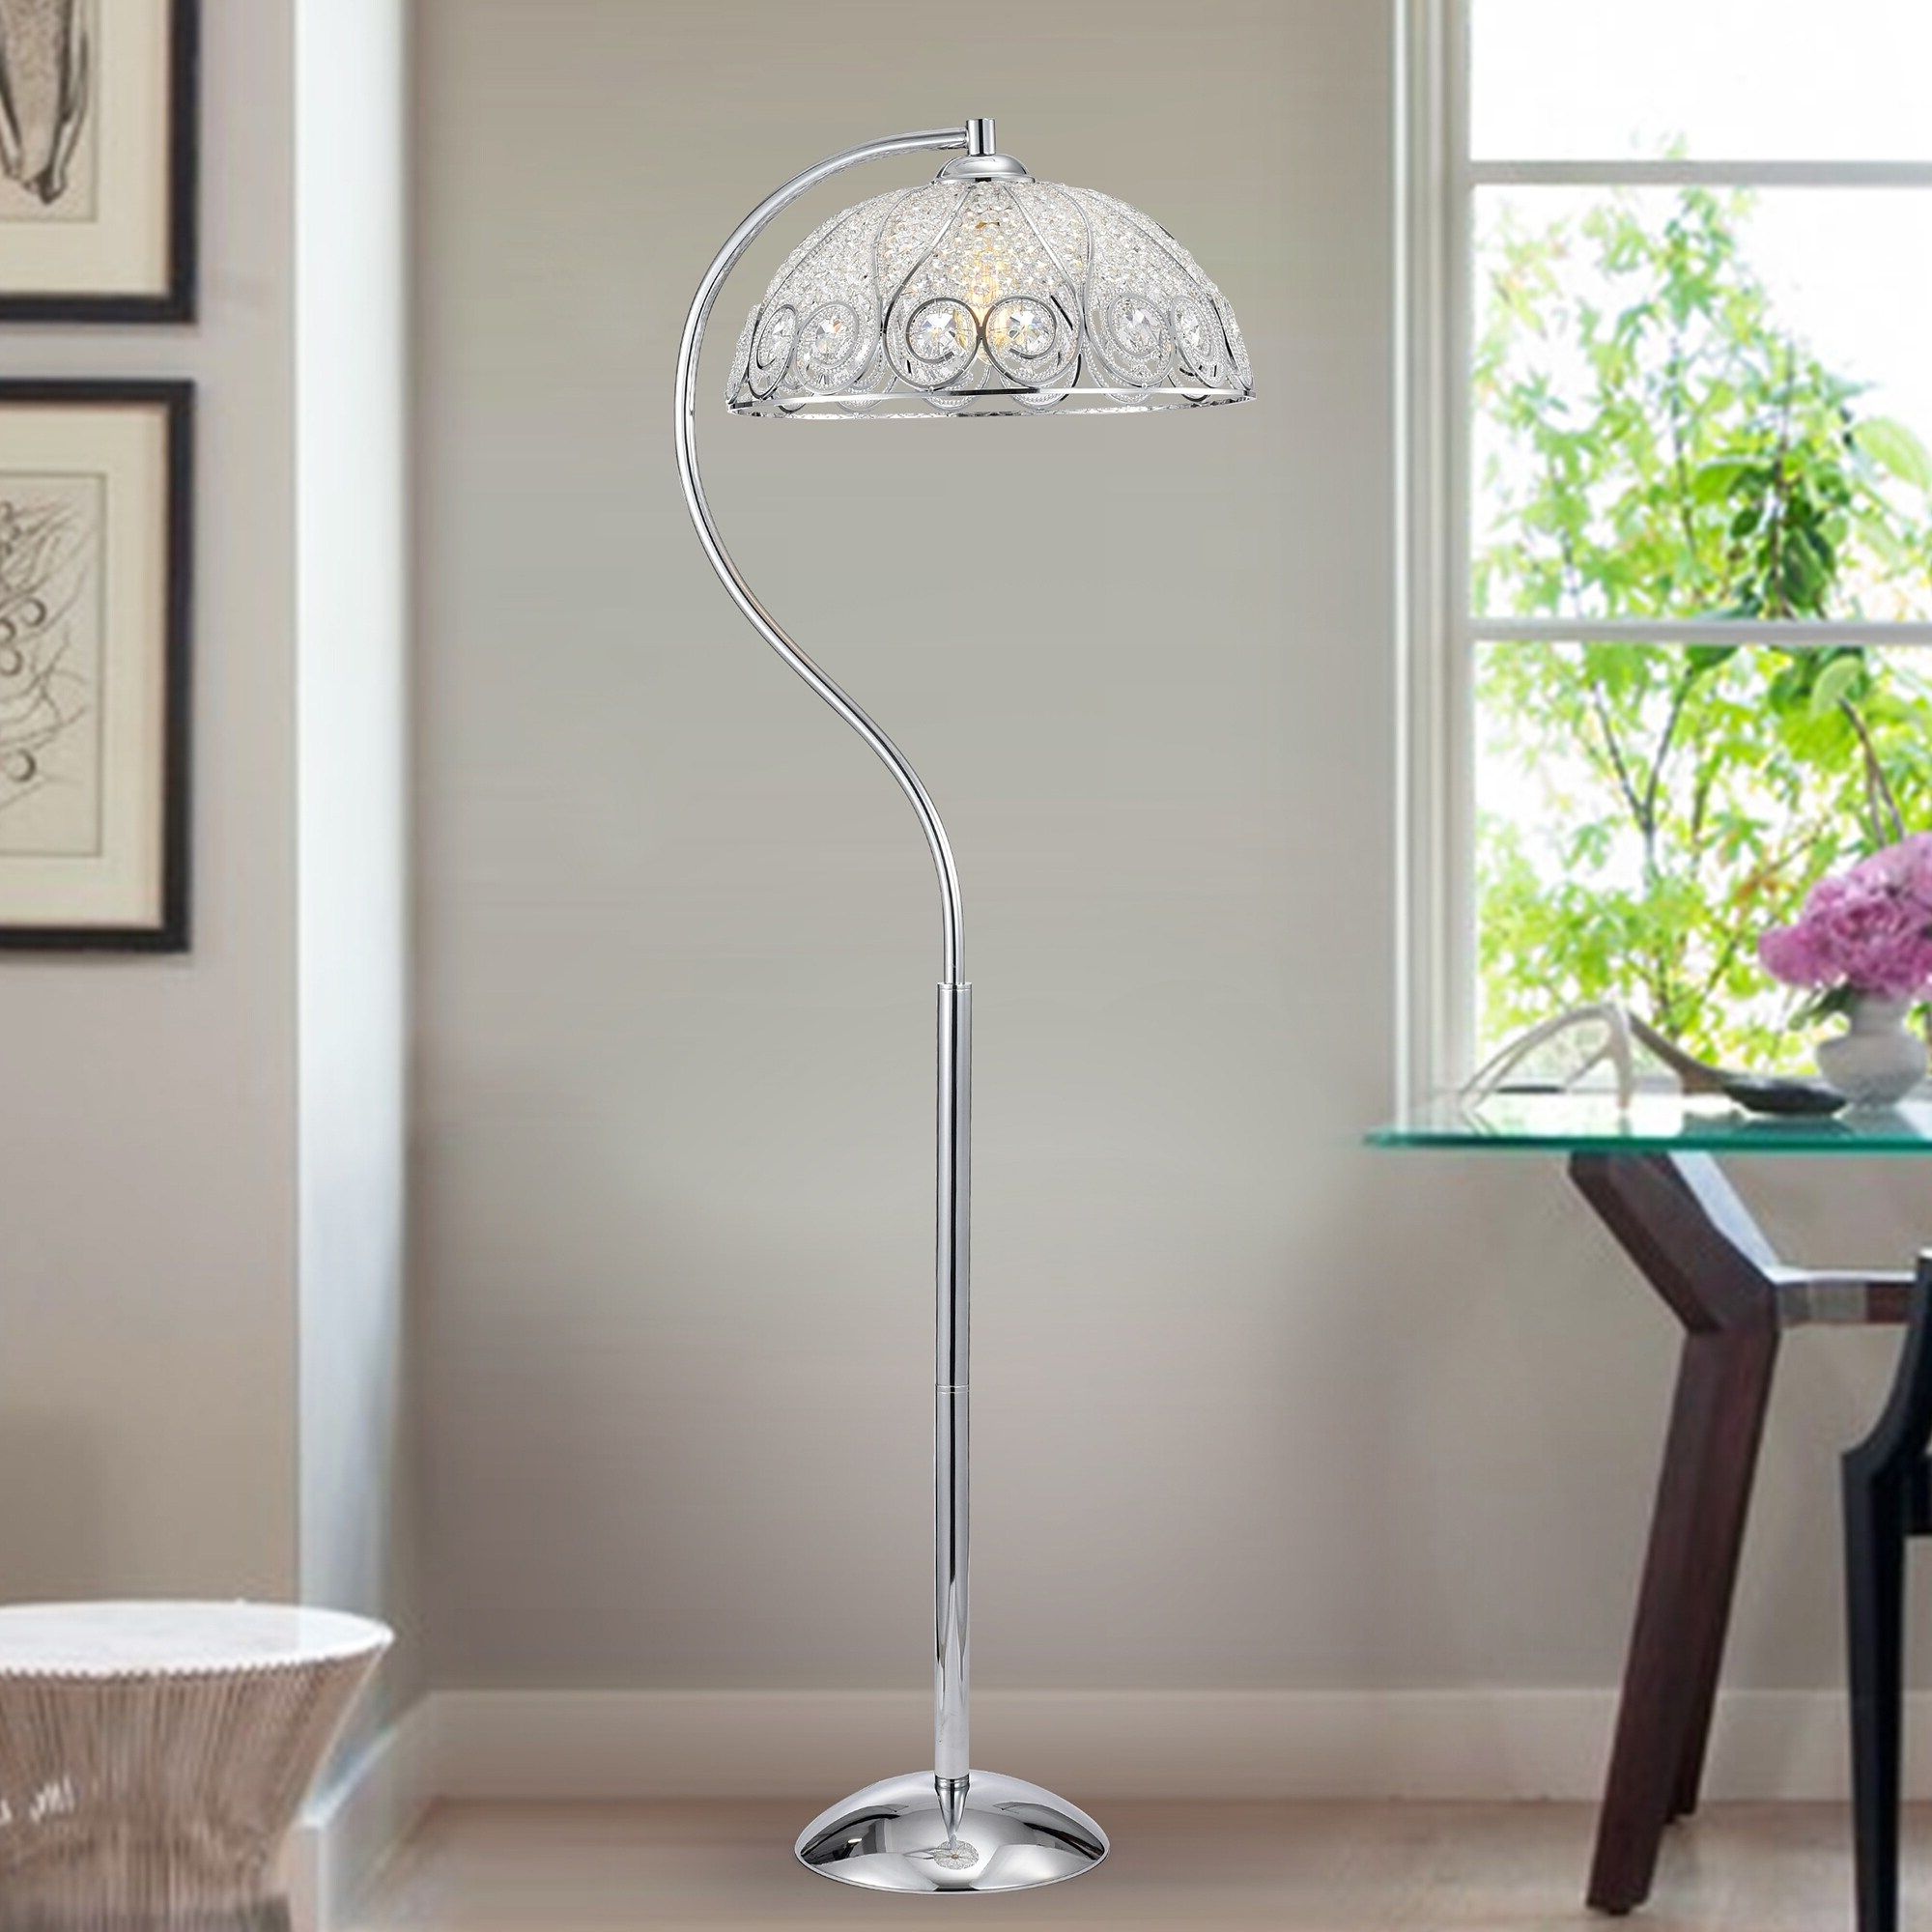 Silver Orchid Wray 1 Light Chrome Floor Lamp – Overstock – 29906464 With Regard To Silver Chrome Floor Lamps (View 9 of 20)